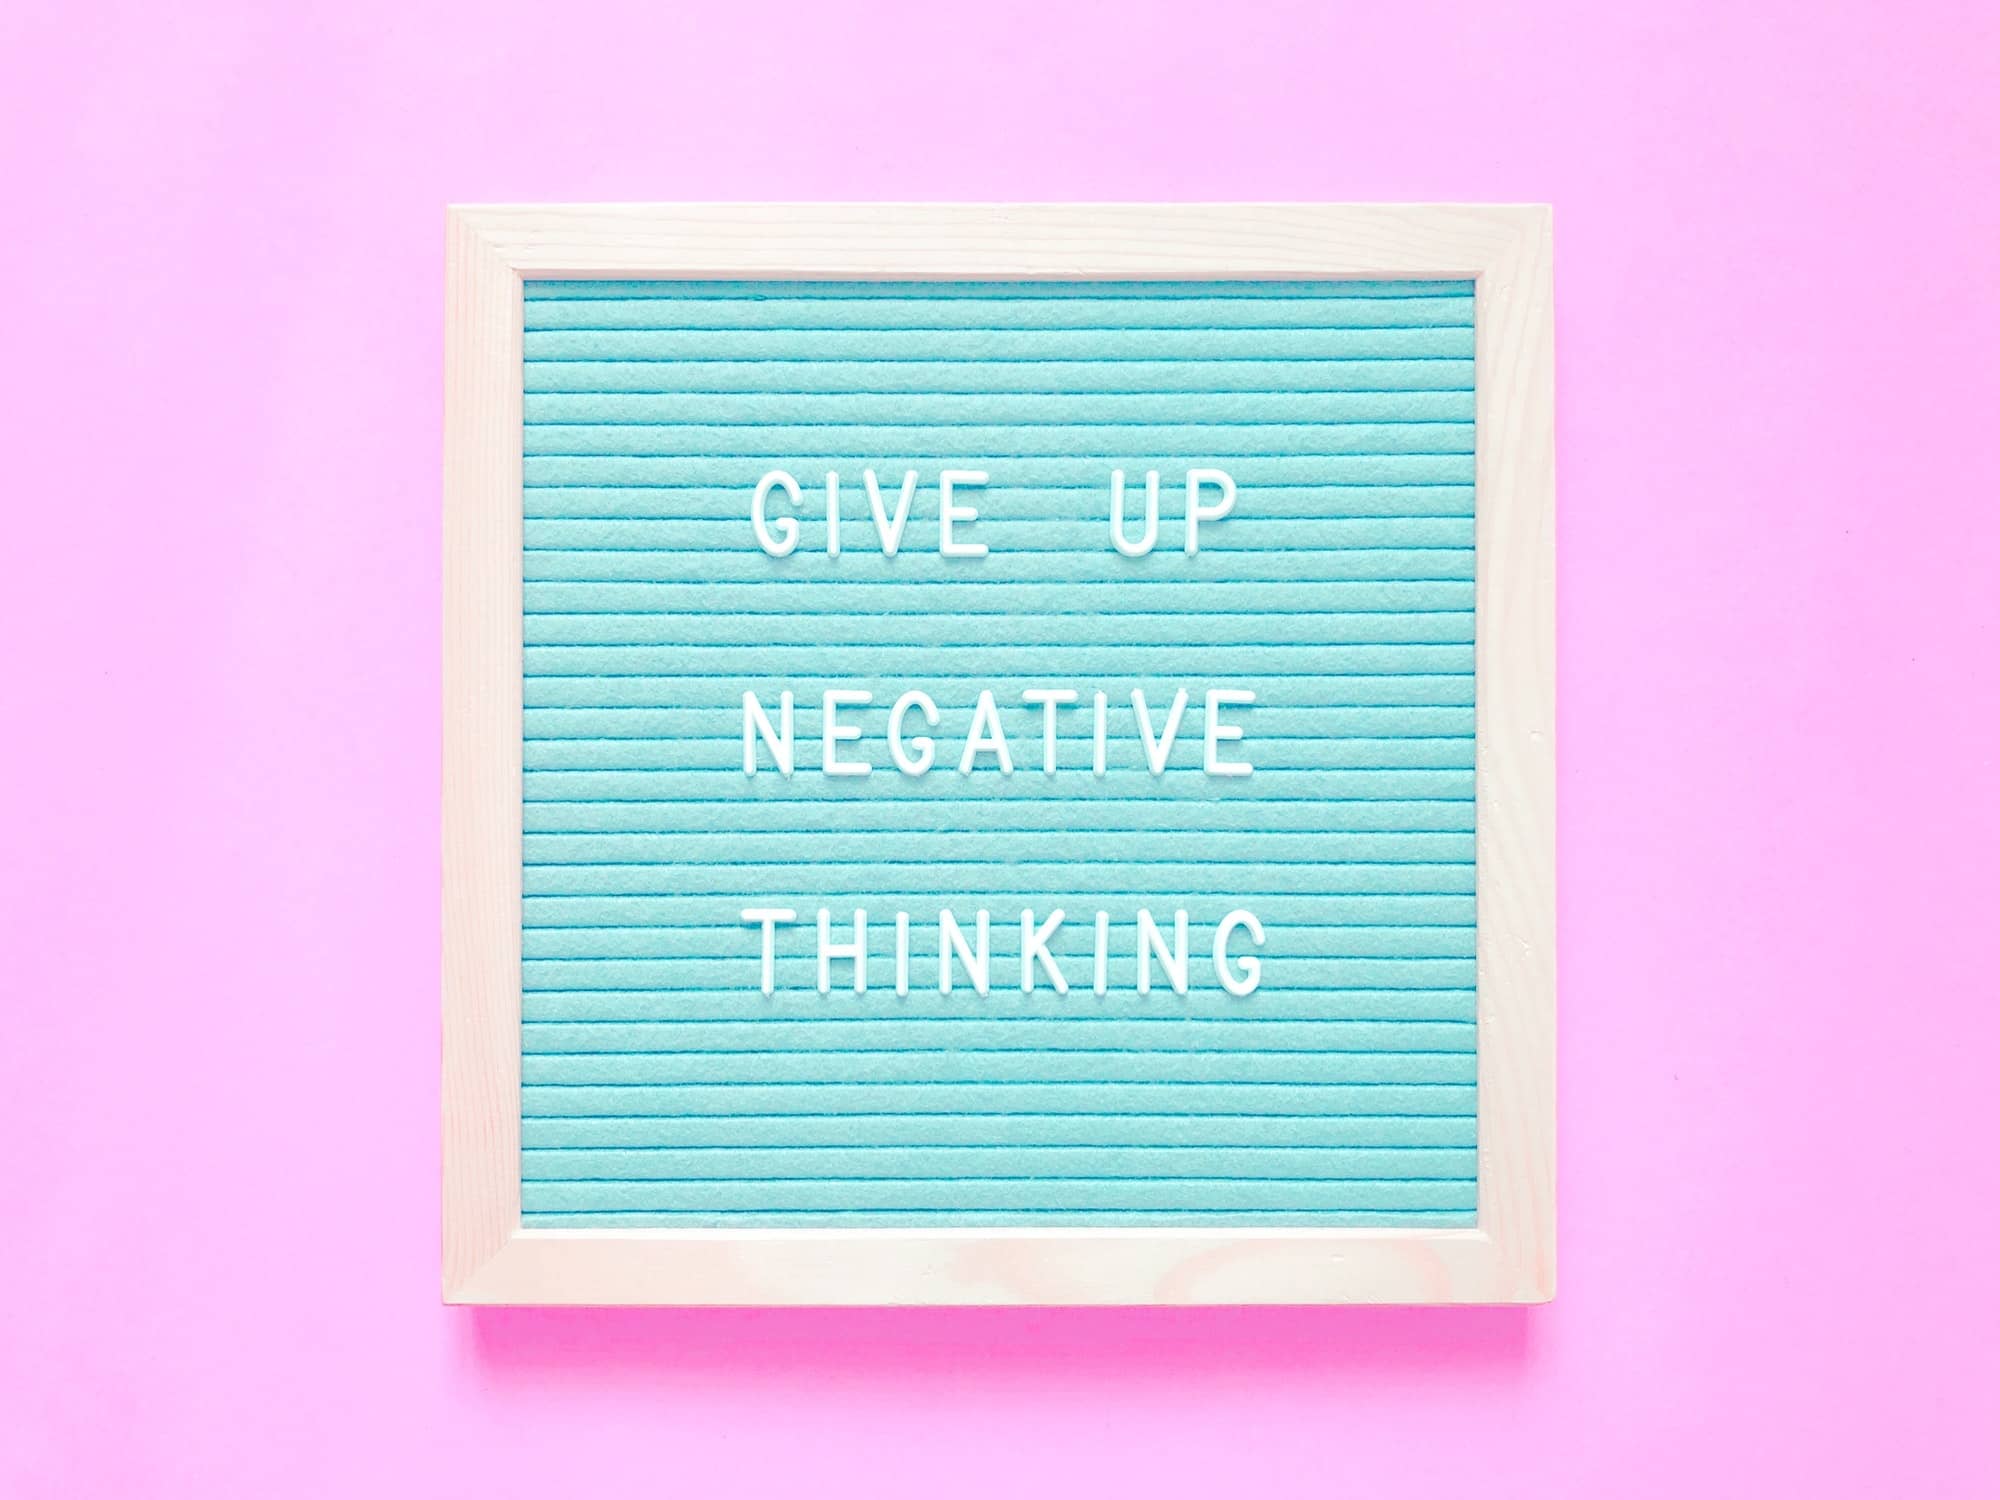 Give up negative thinking ? Stay positive. Optimist. Optimism. Optimistic. Great quote.